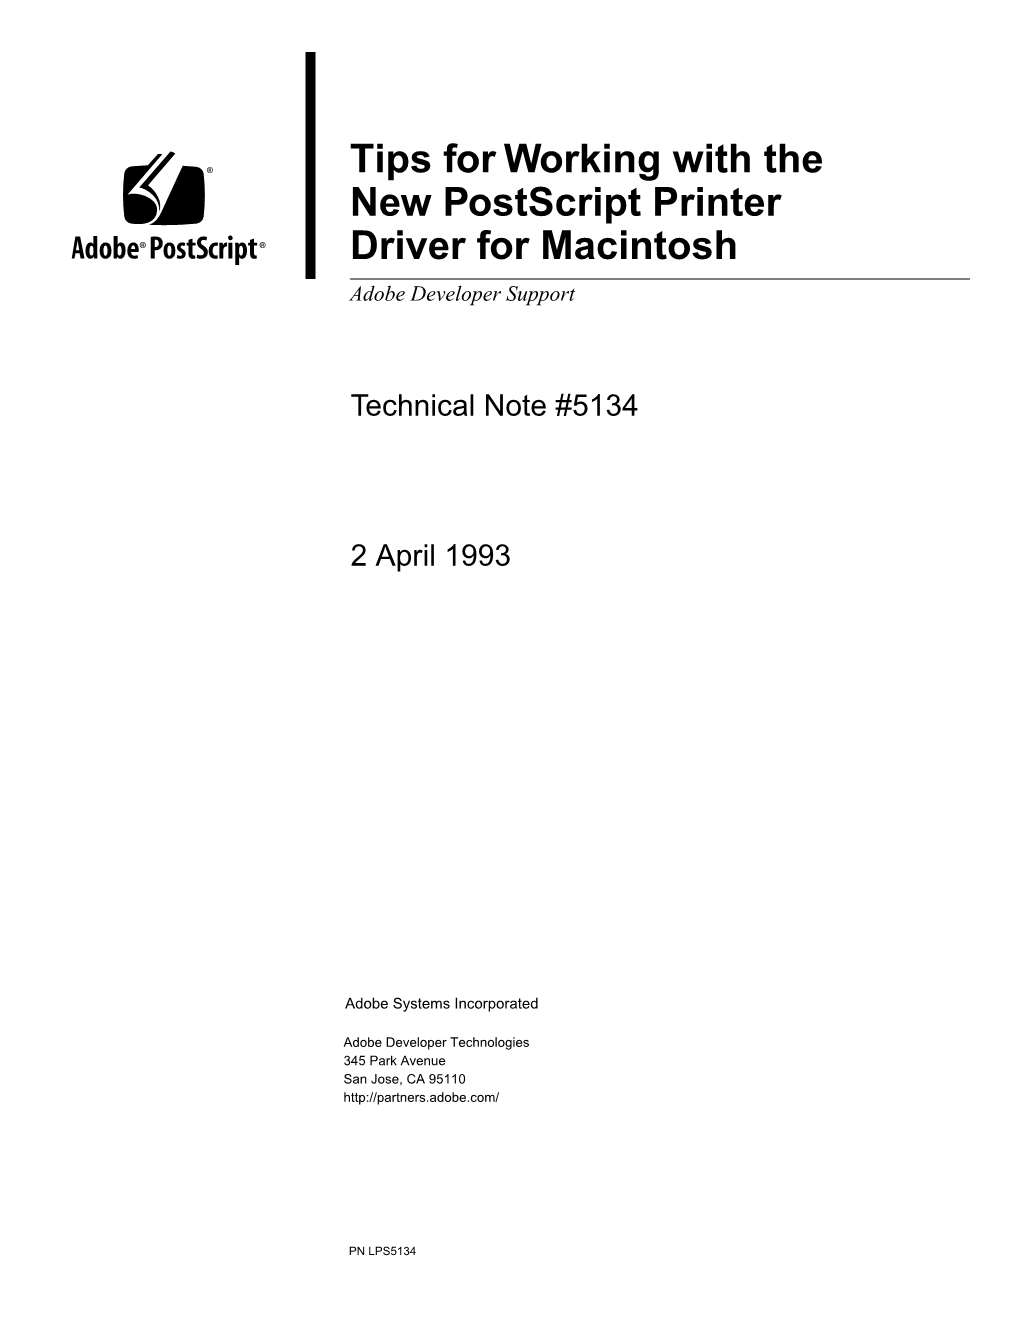 Tips for Working with Postscript Printer Driver for Macintosh